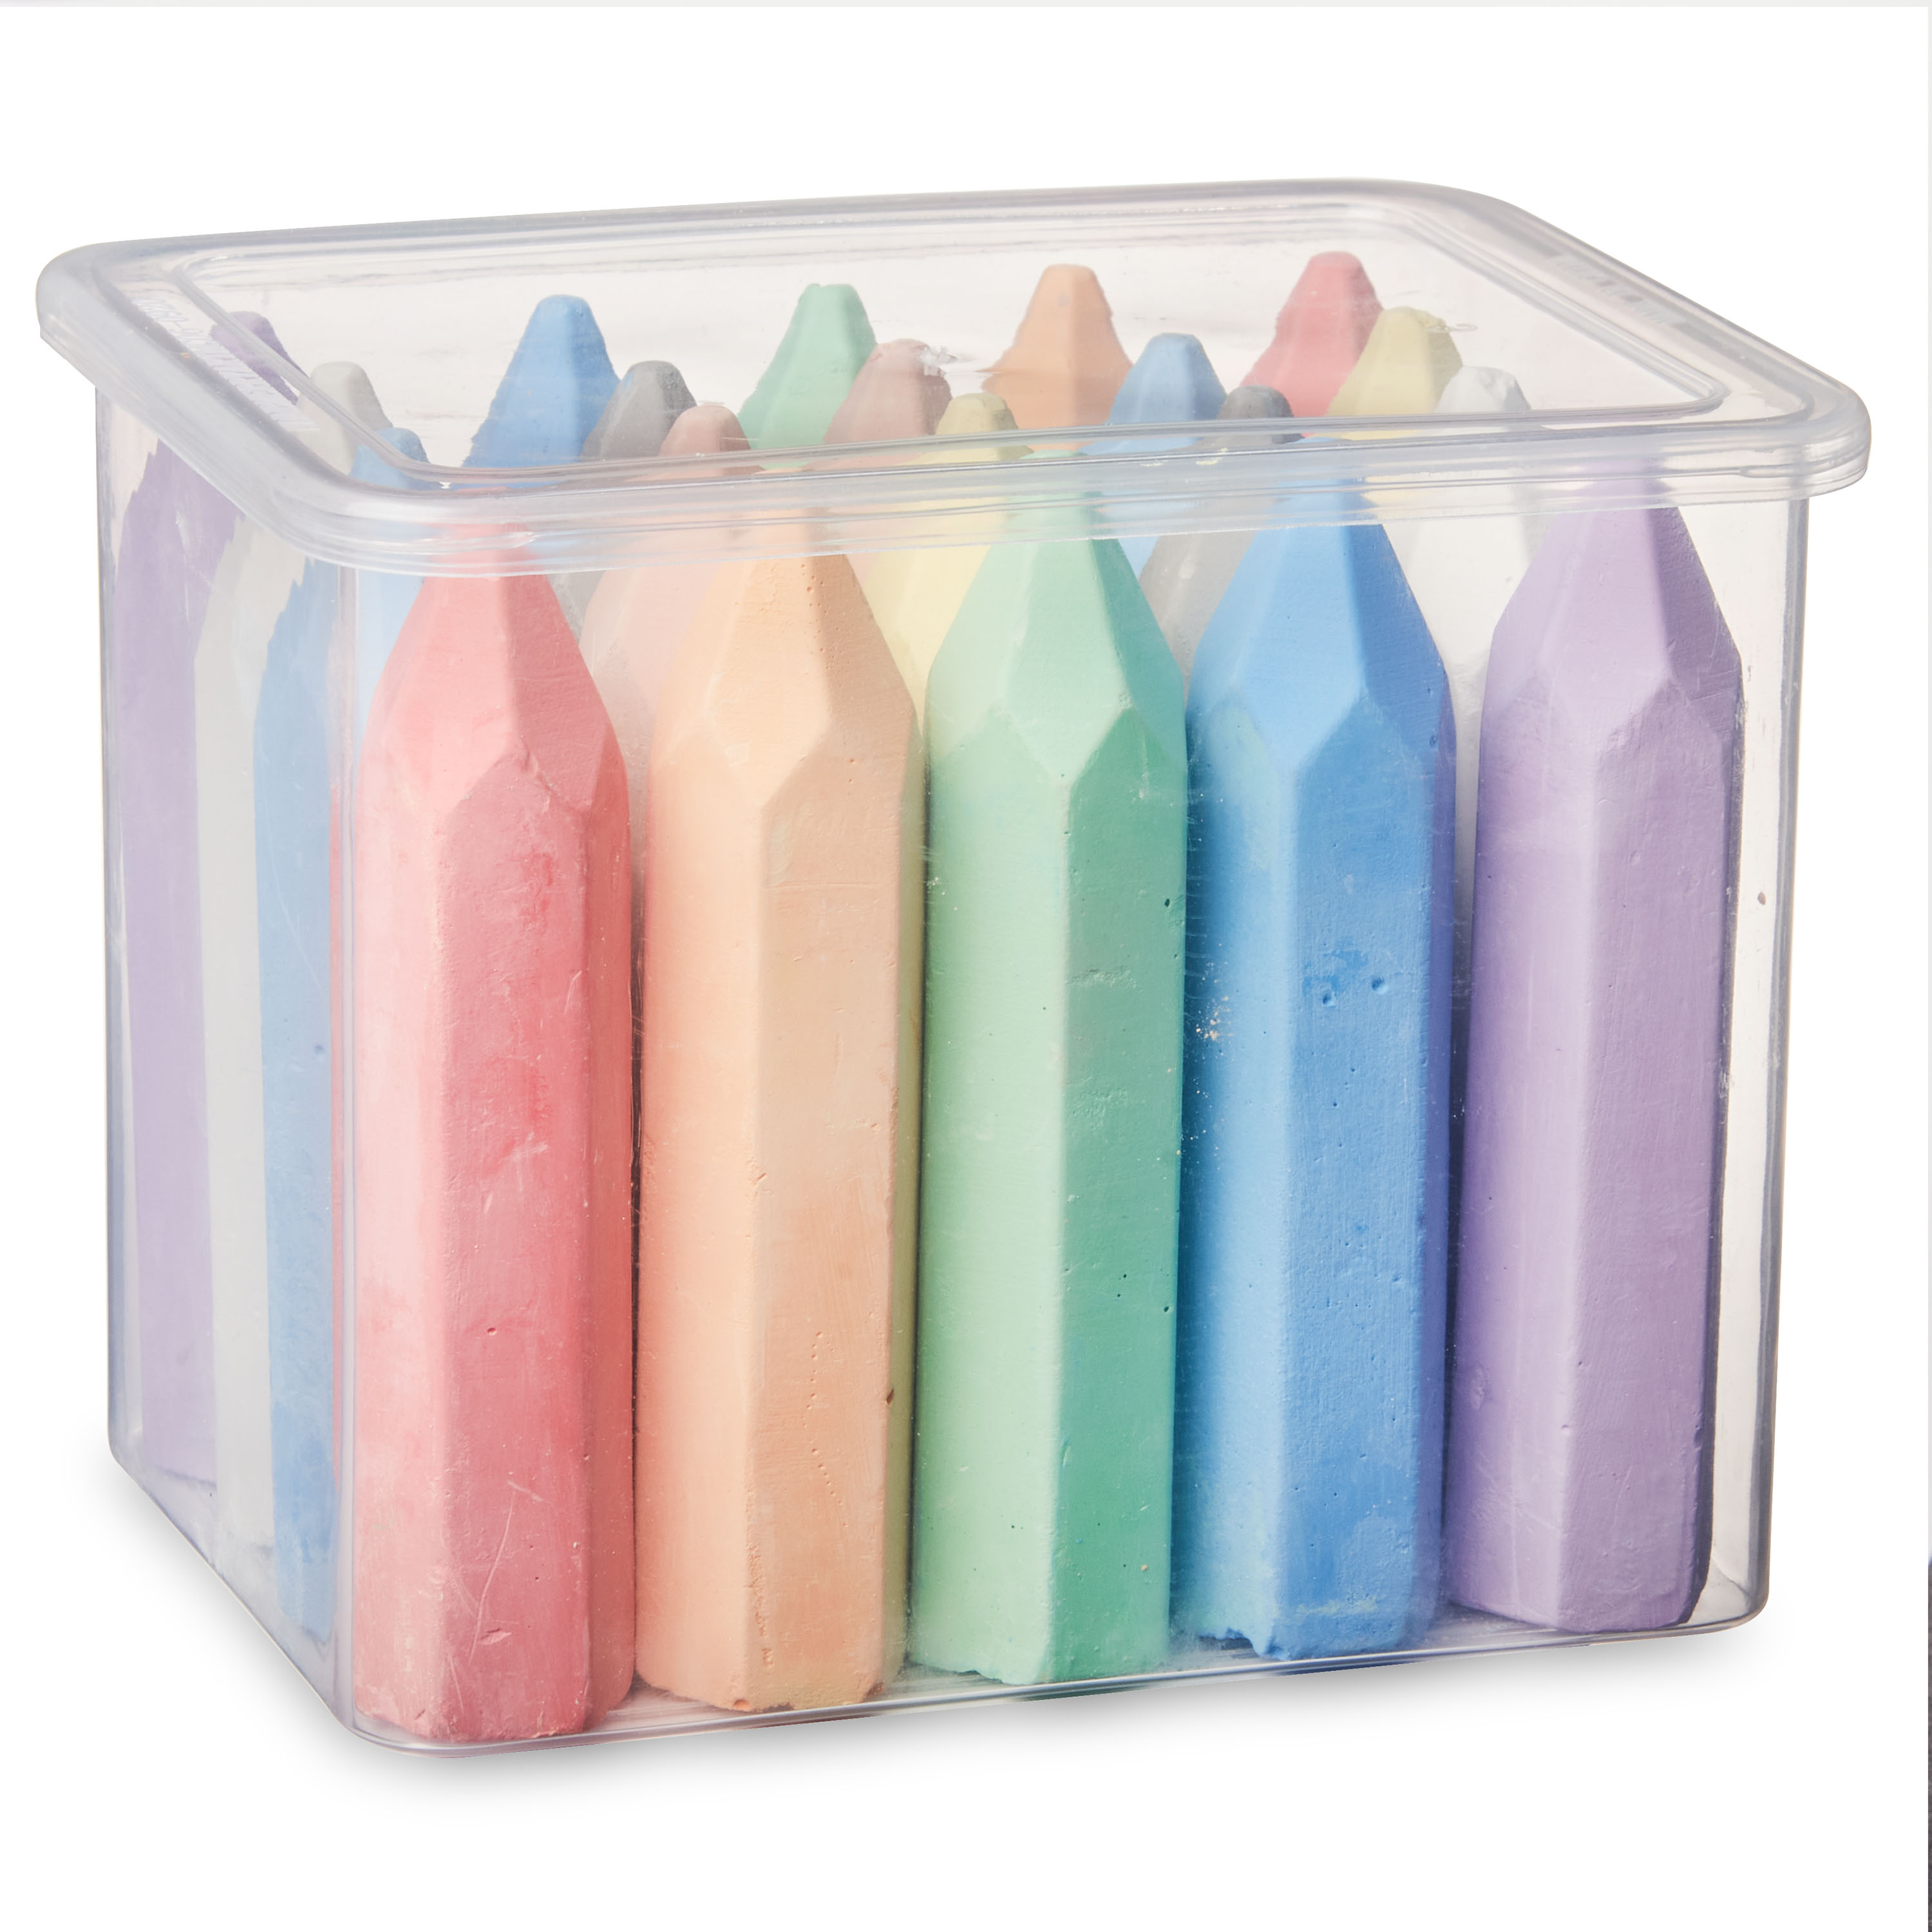 Play Day Sidewalk Chalk, 20 Pieces, Assorted Colors - image 4 of 5